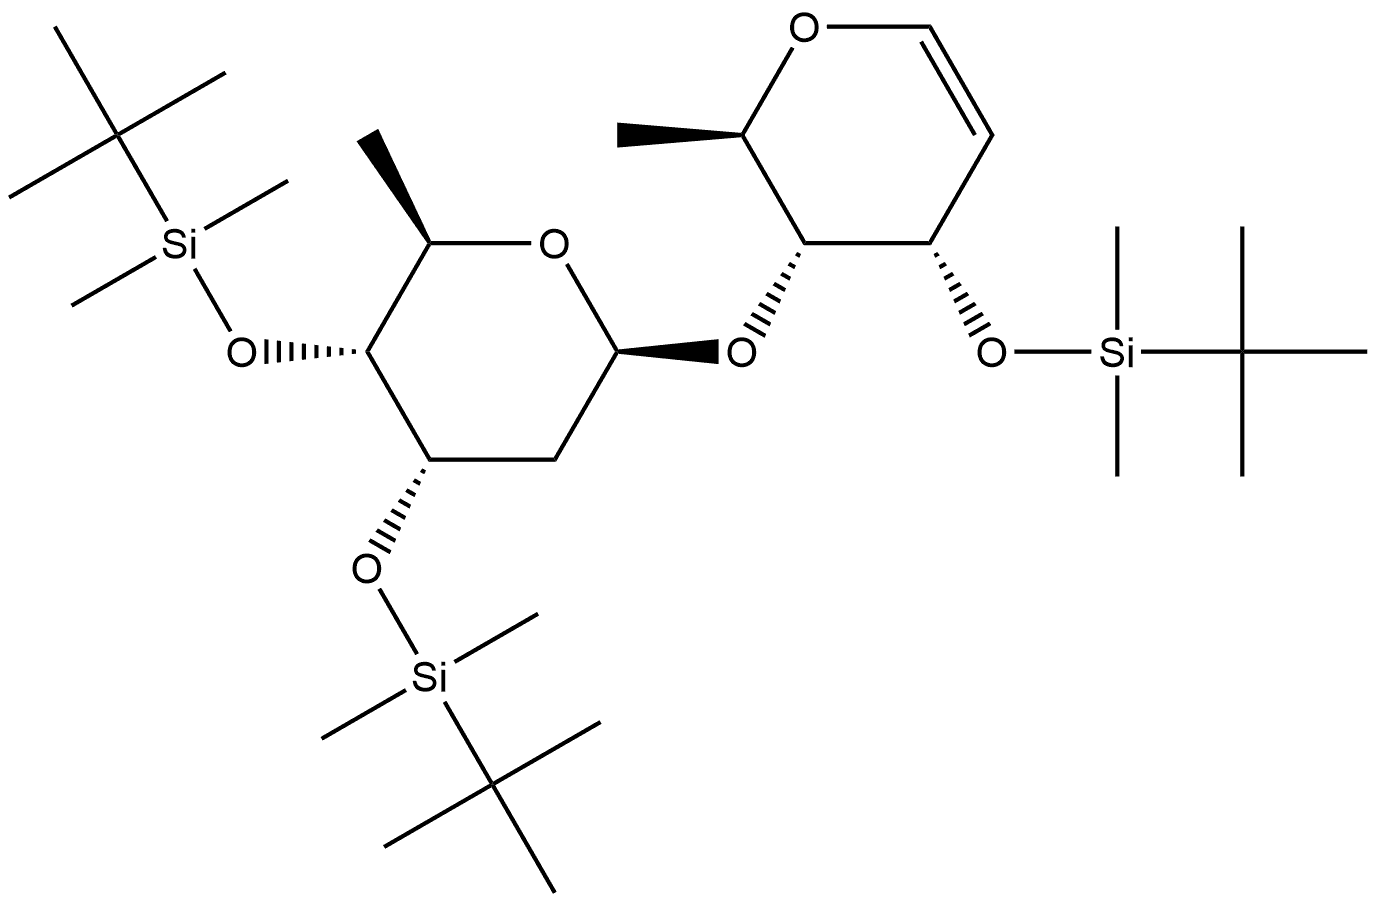 D-ribo-Hex-1-enitol, 1,5-anhydro-2,6-dideoxy-4-O-[2,6-dideoxy-3,4-bis-O-[(1,1-dimethylethyl)dimethylsilyl]-β-D-ribo-hexopyranosyl]-3-O-[(1,1-dimethylethyl)dimethylsilyl]-